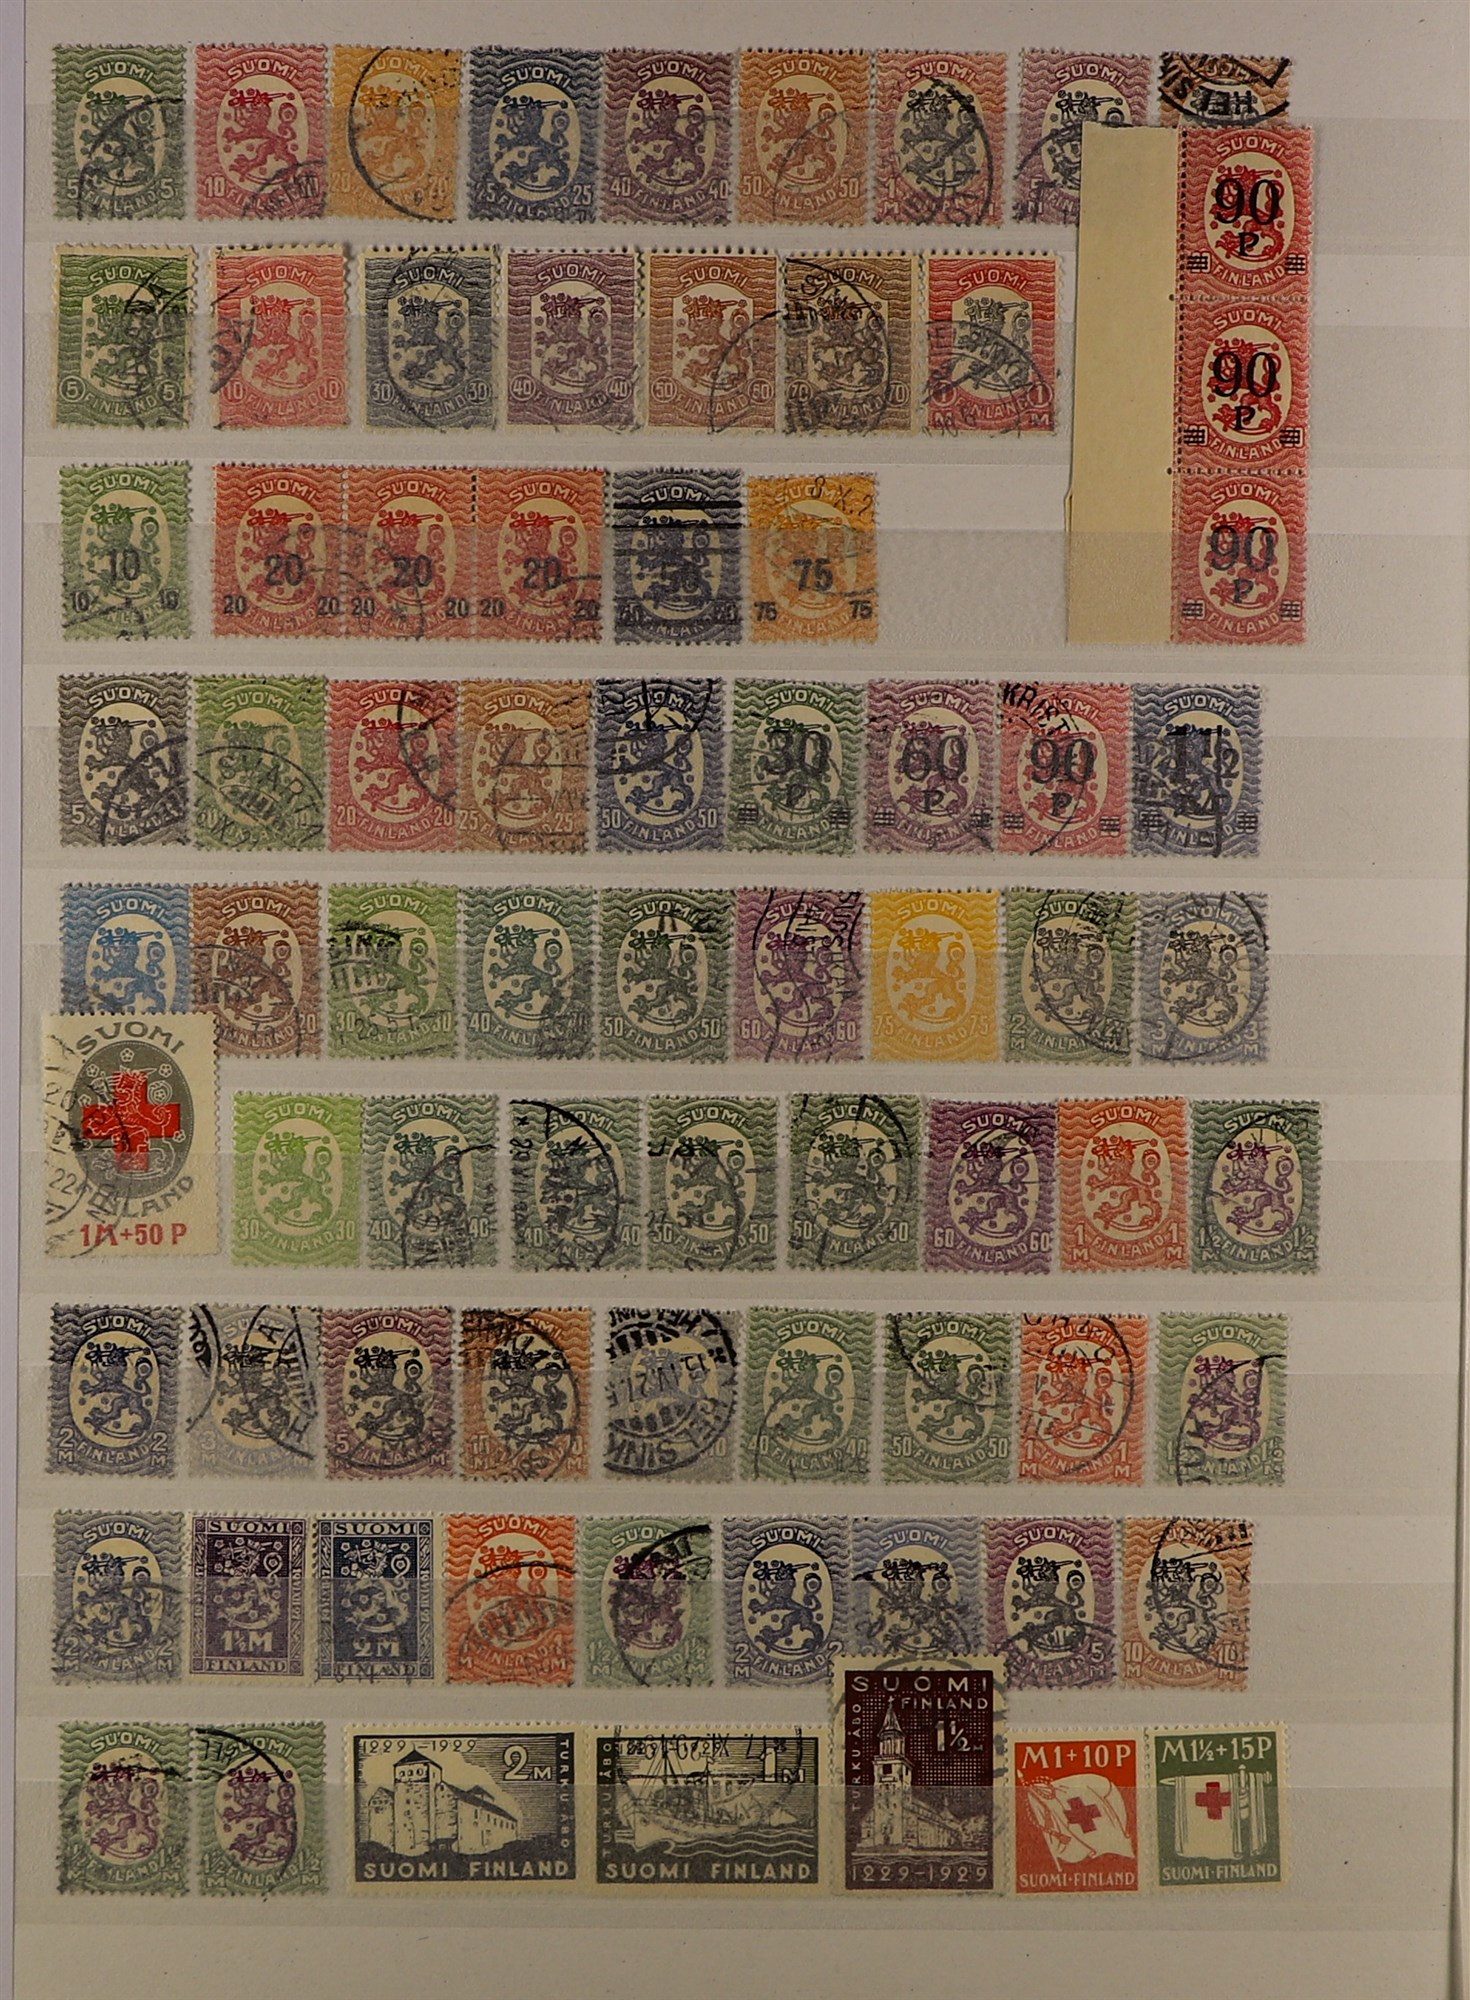 FINLAND 1860 - 2010's ACCUMULATION IN CARTON of mint / never hinged mint & used stamps and miniature - Image 2 of 34